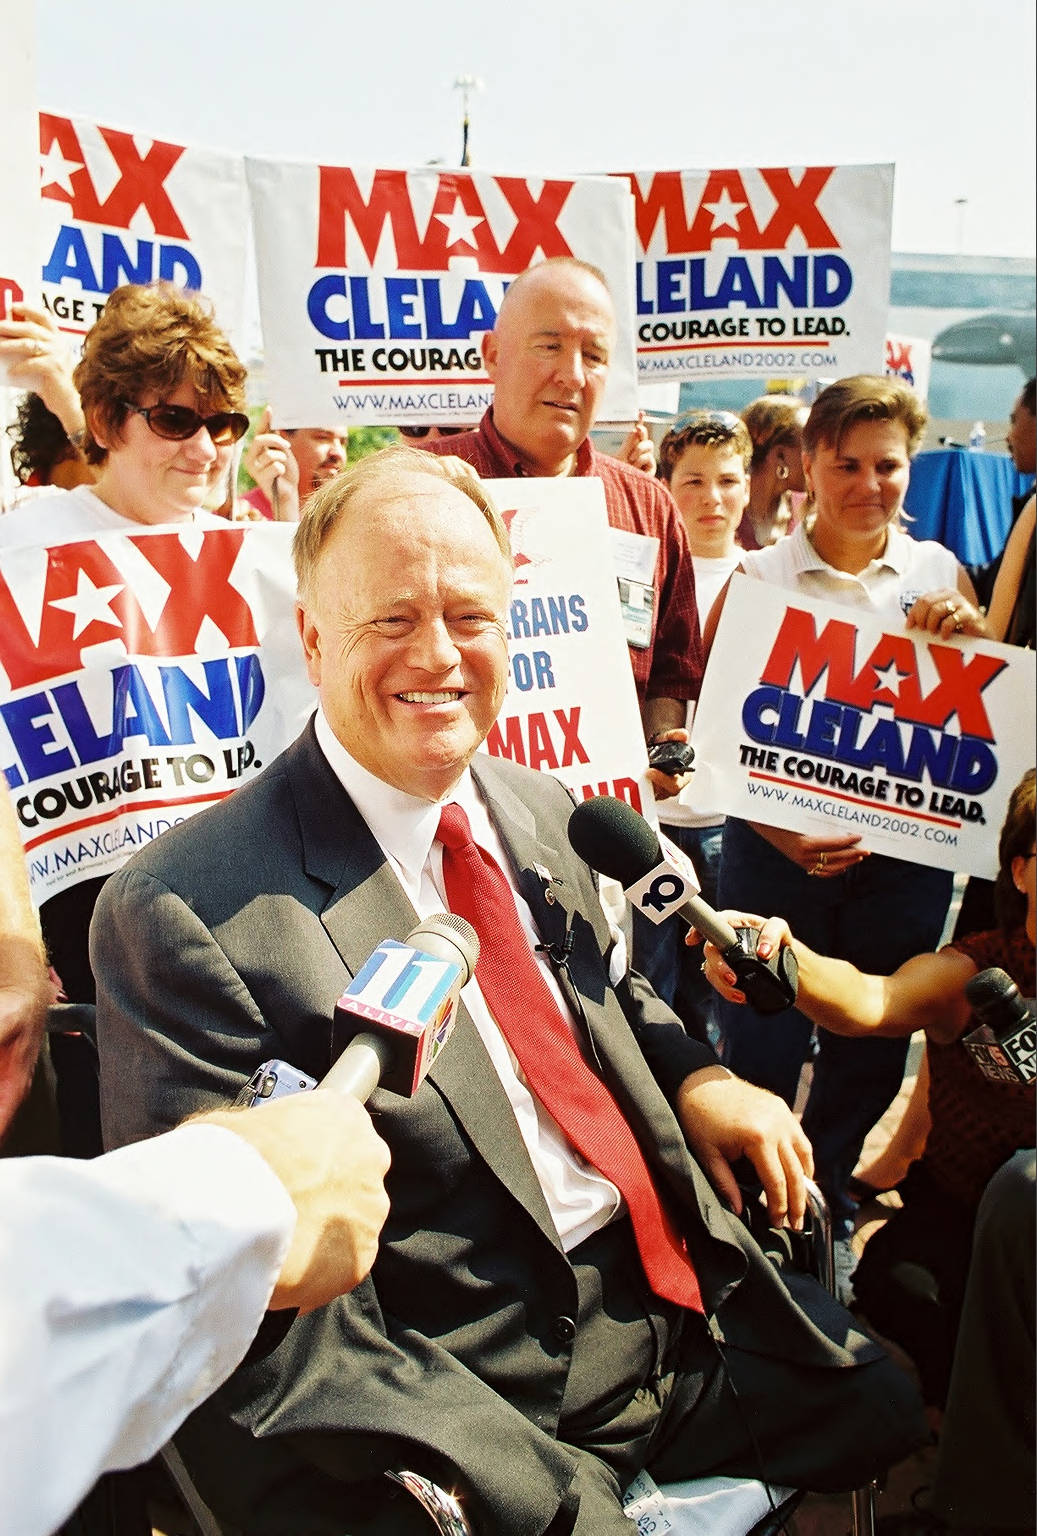 Max Cleland is on a campaign stop with his name on campaign signs all around.